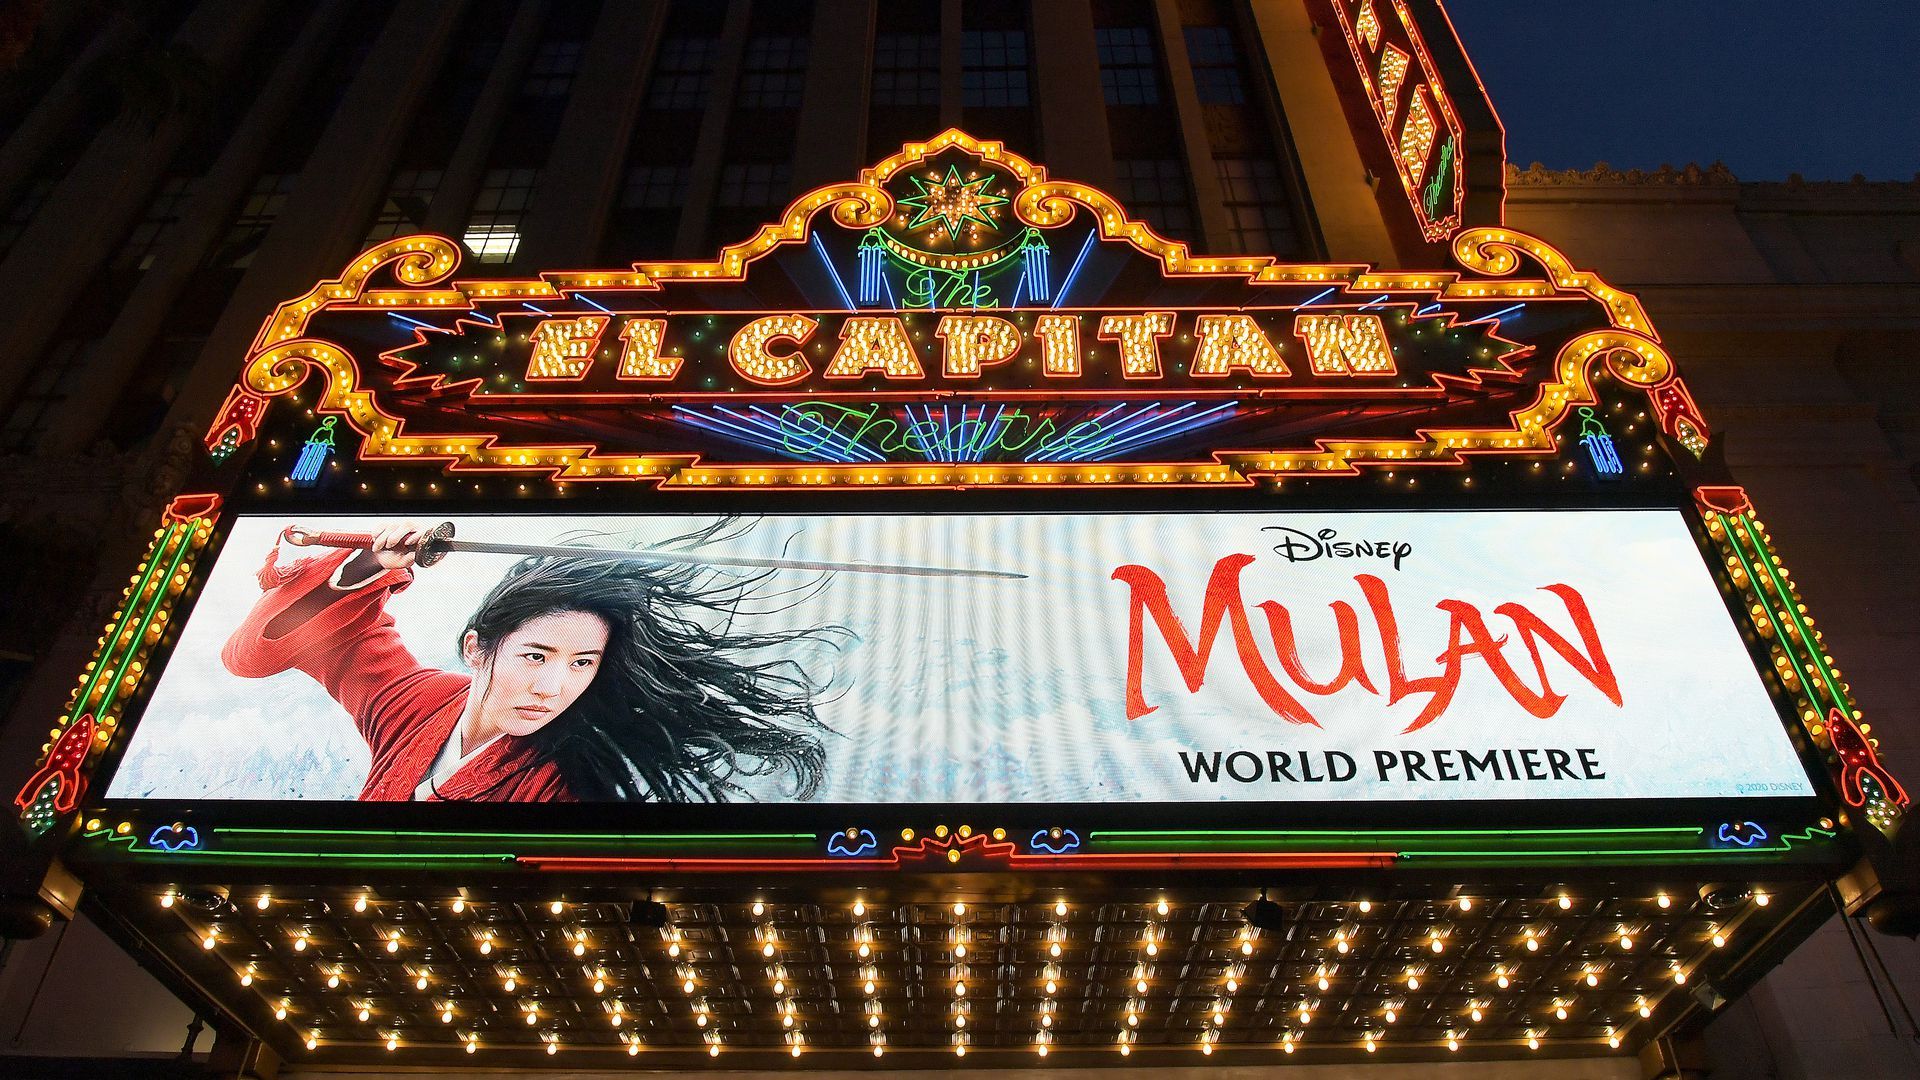 The World Premiere of Disney's 'Mulan' at the Dolby Theatre on March 9, 2020 in Hollywood, California. Photo: Charley Gallay/Getty Images for Disney